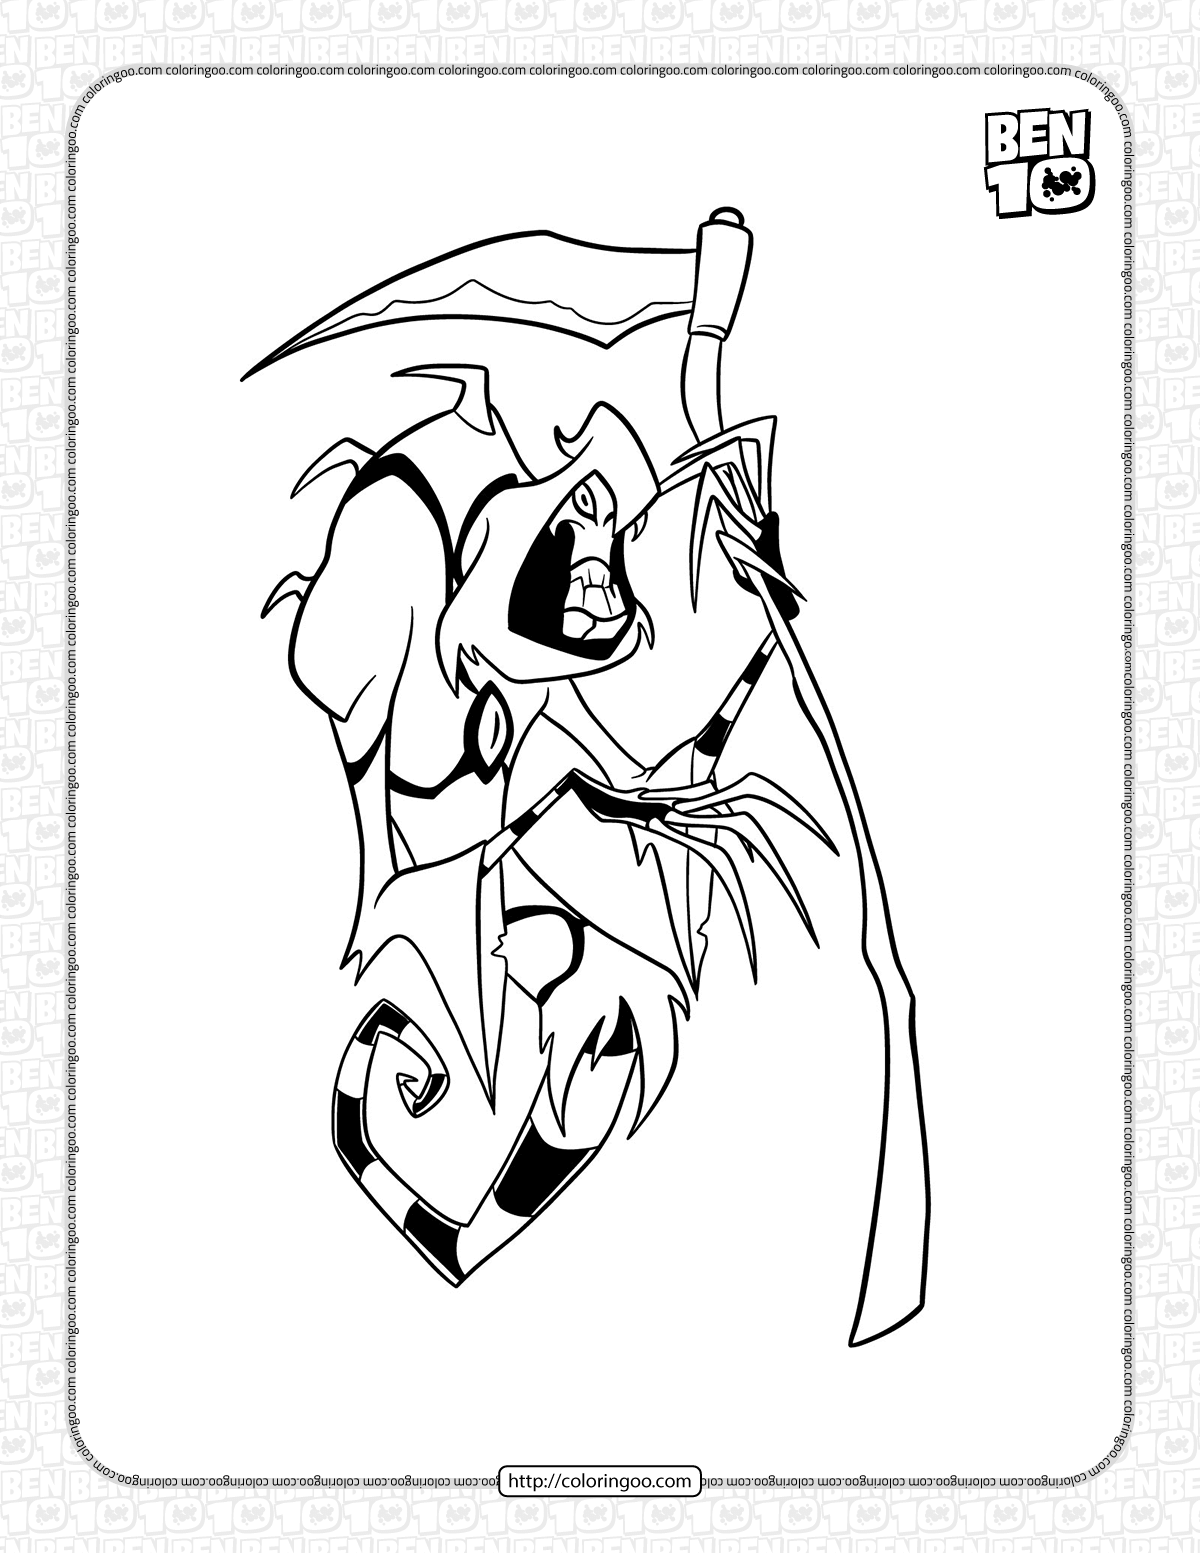 zsskayr classic omniverse coloring page